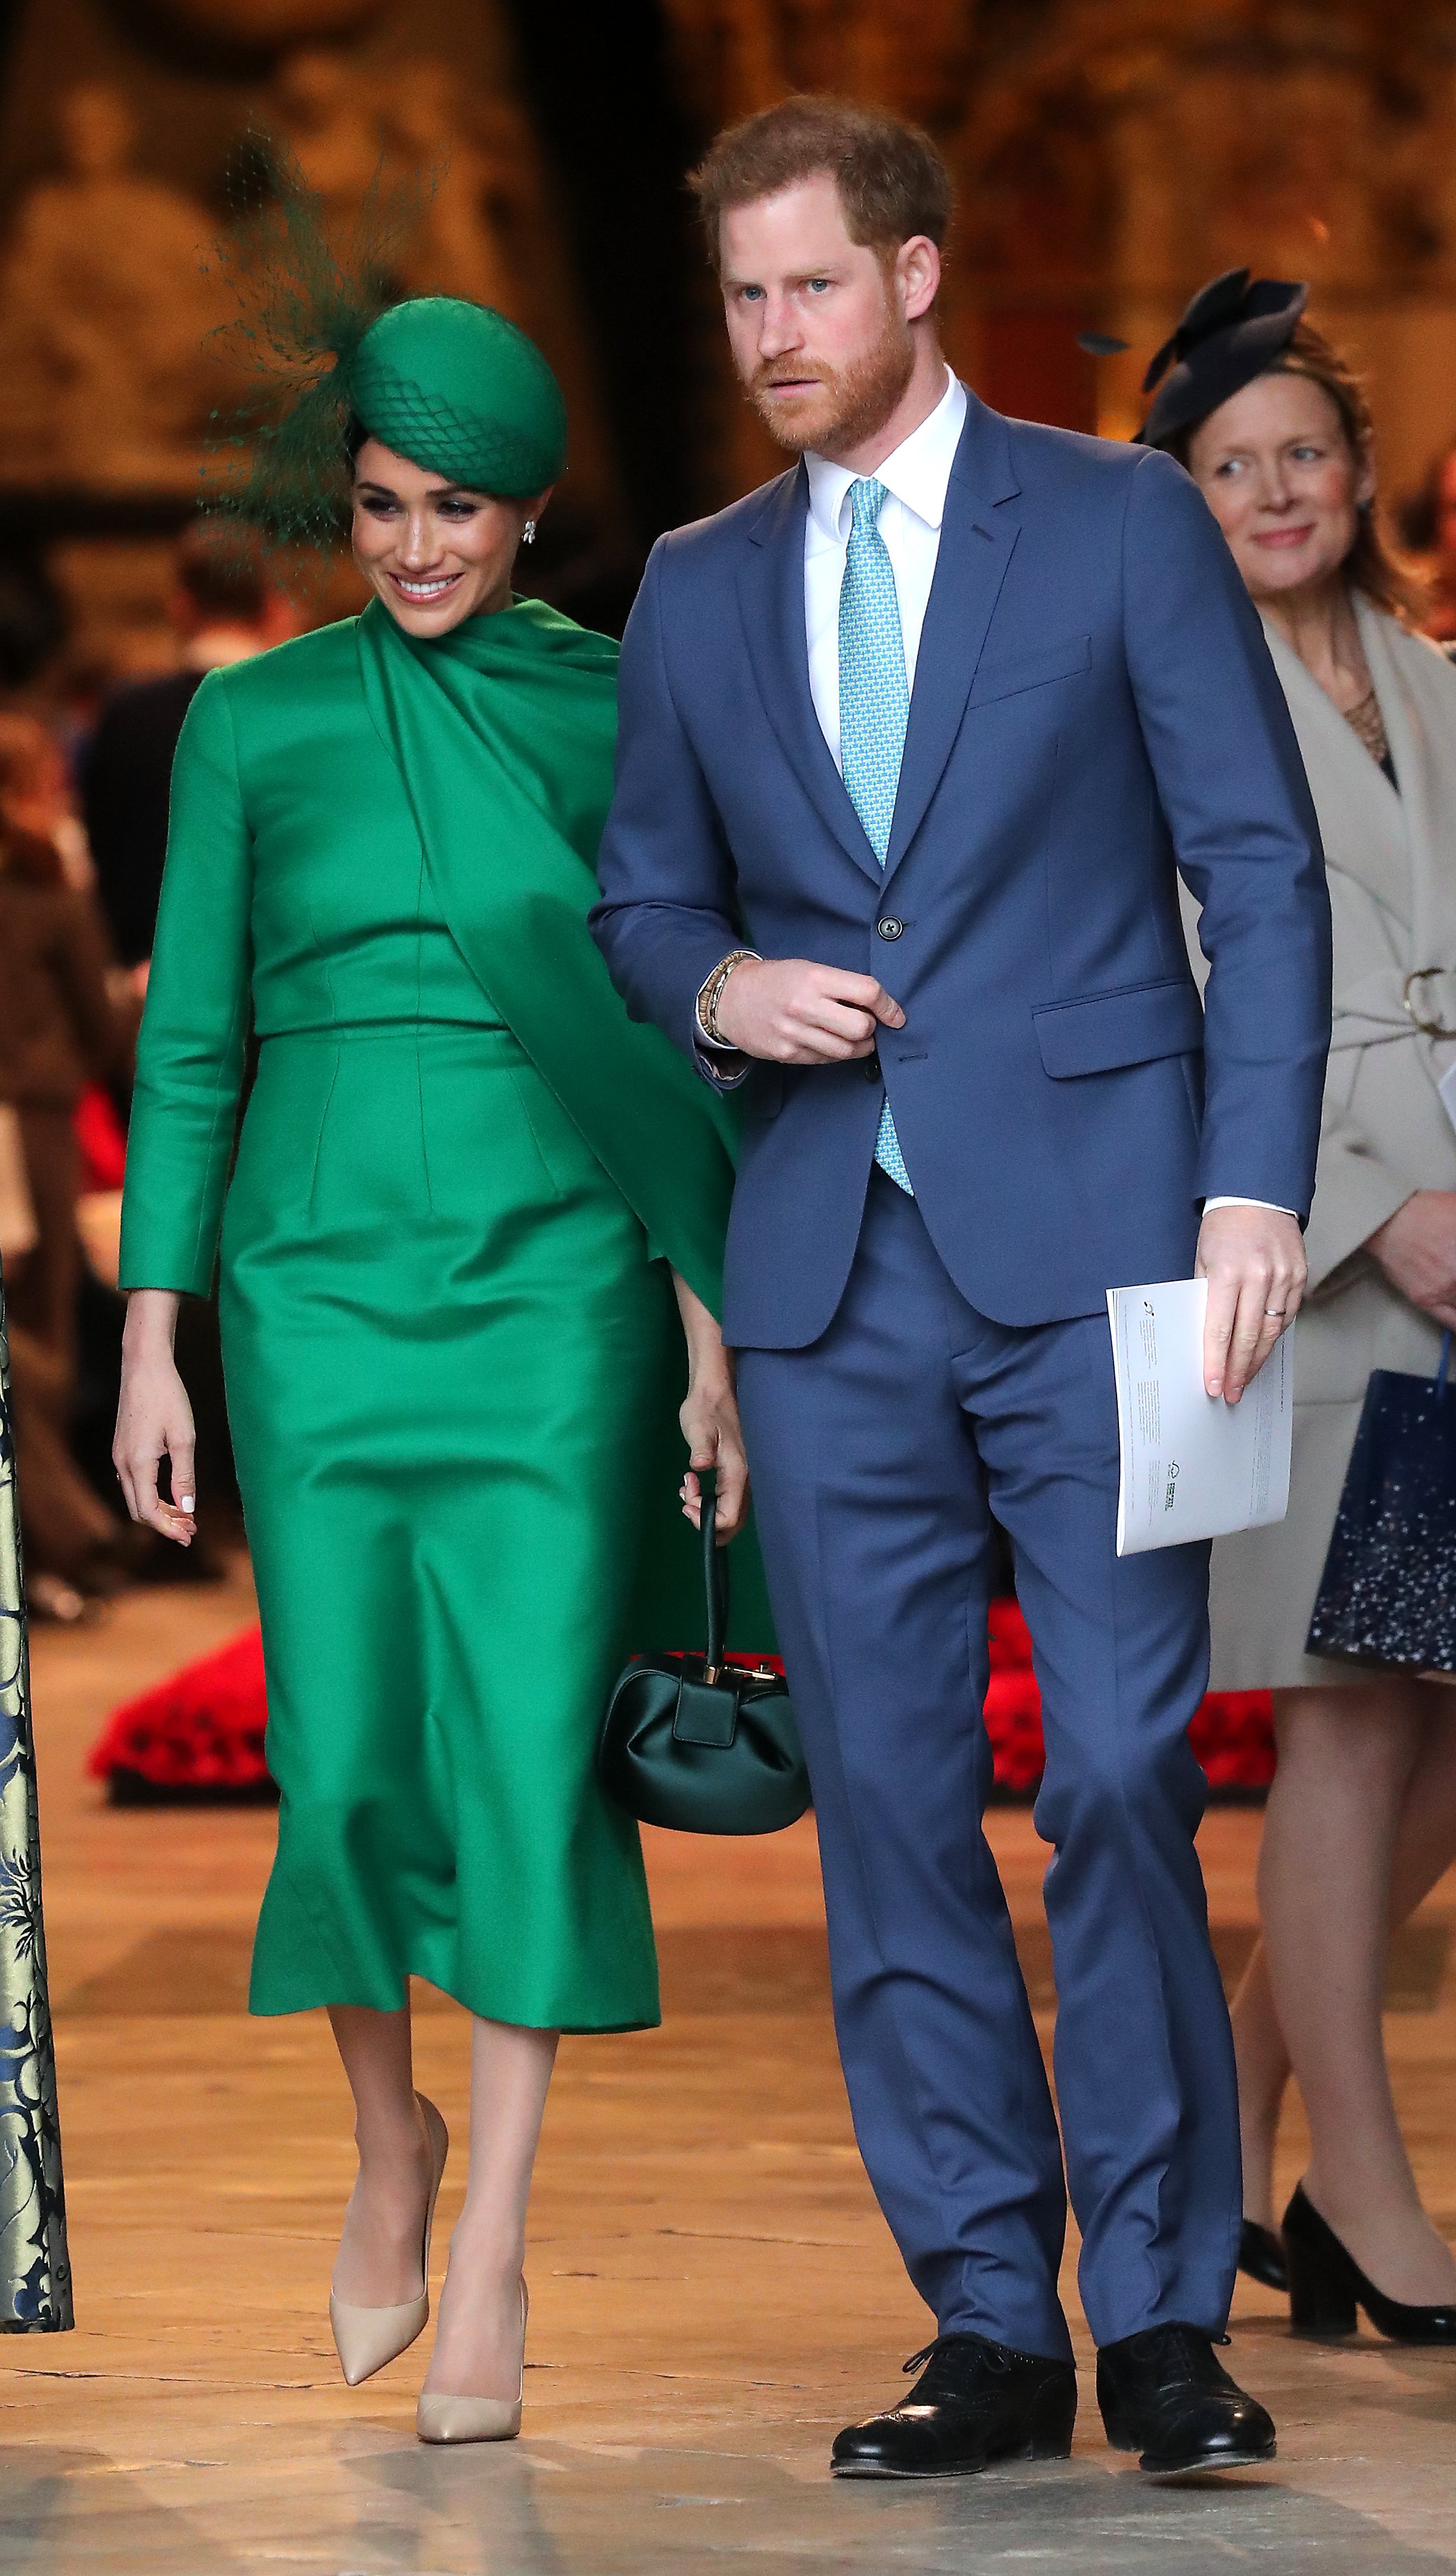 Prince Harry and Meghan Markle attending "The Commonwealth Day of Service" event in London, March, 2020. | Photo: Getty Images